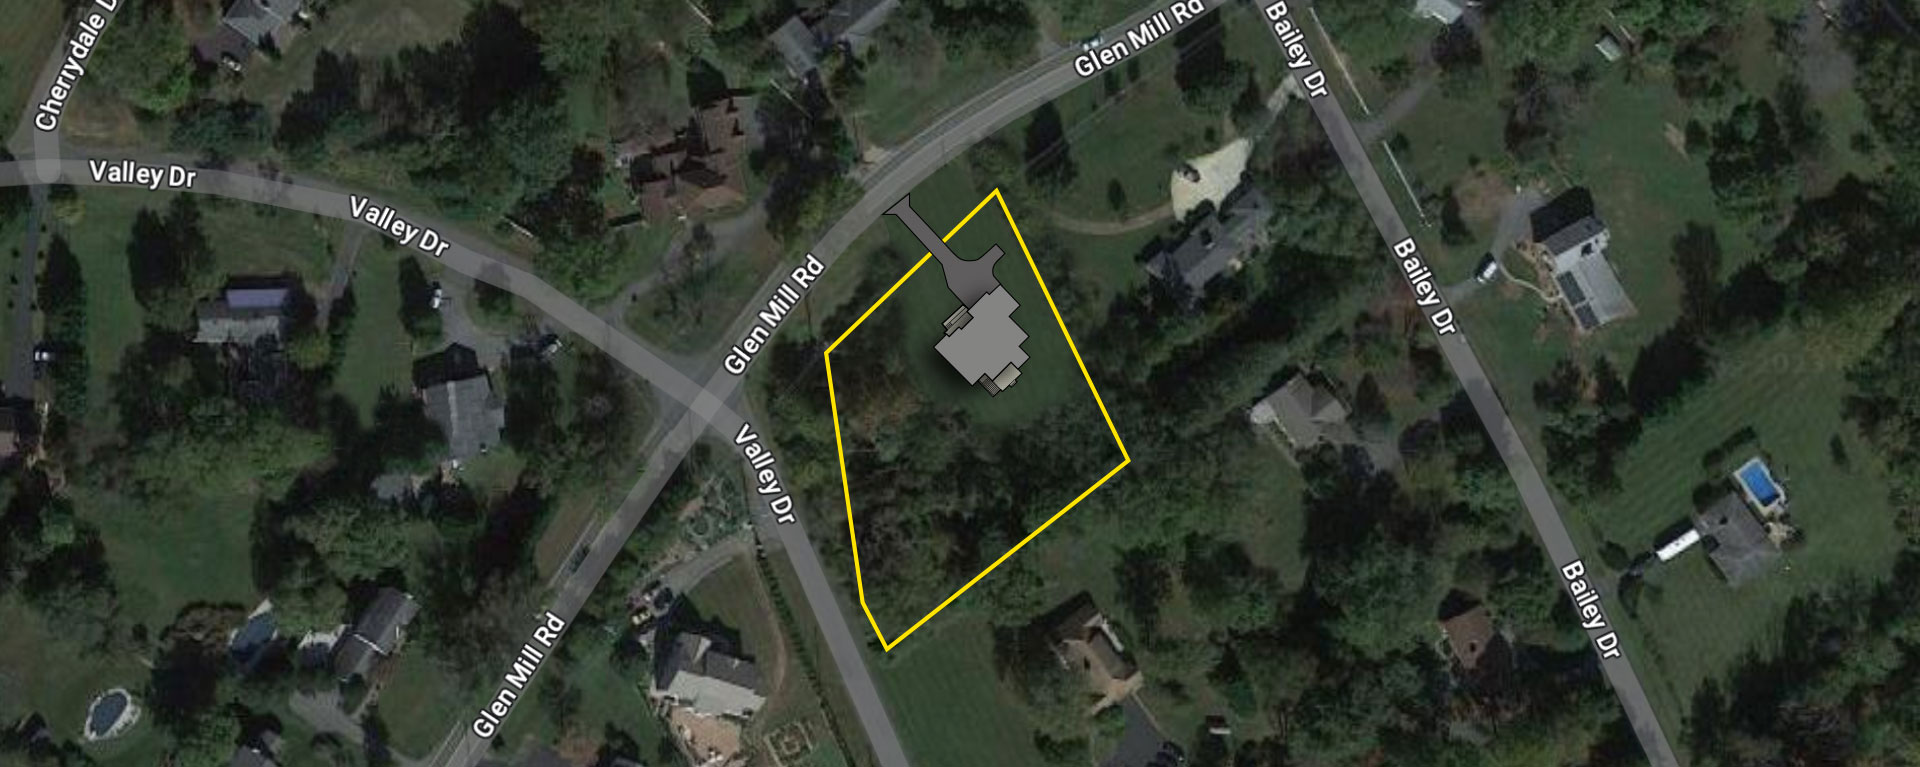 A satellite image showing the house placement and site outline for 12928 Valley Dr.